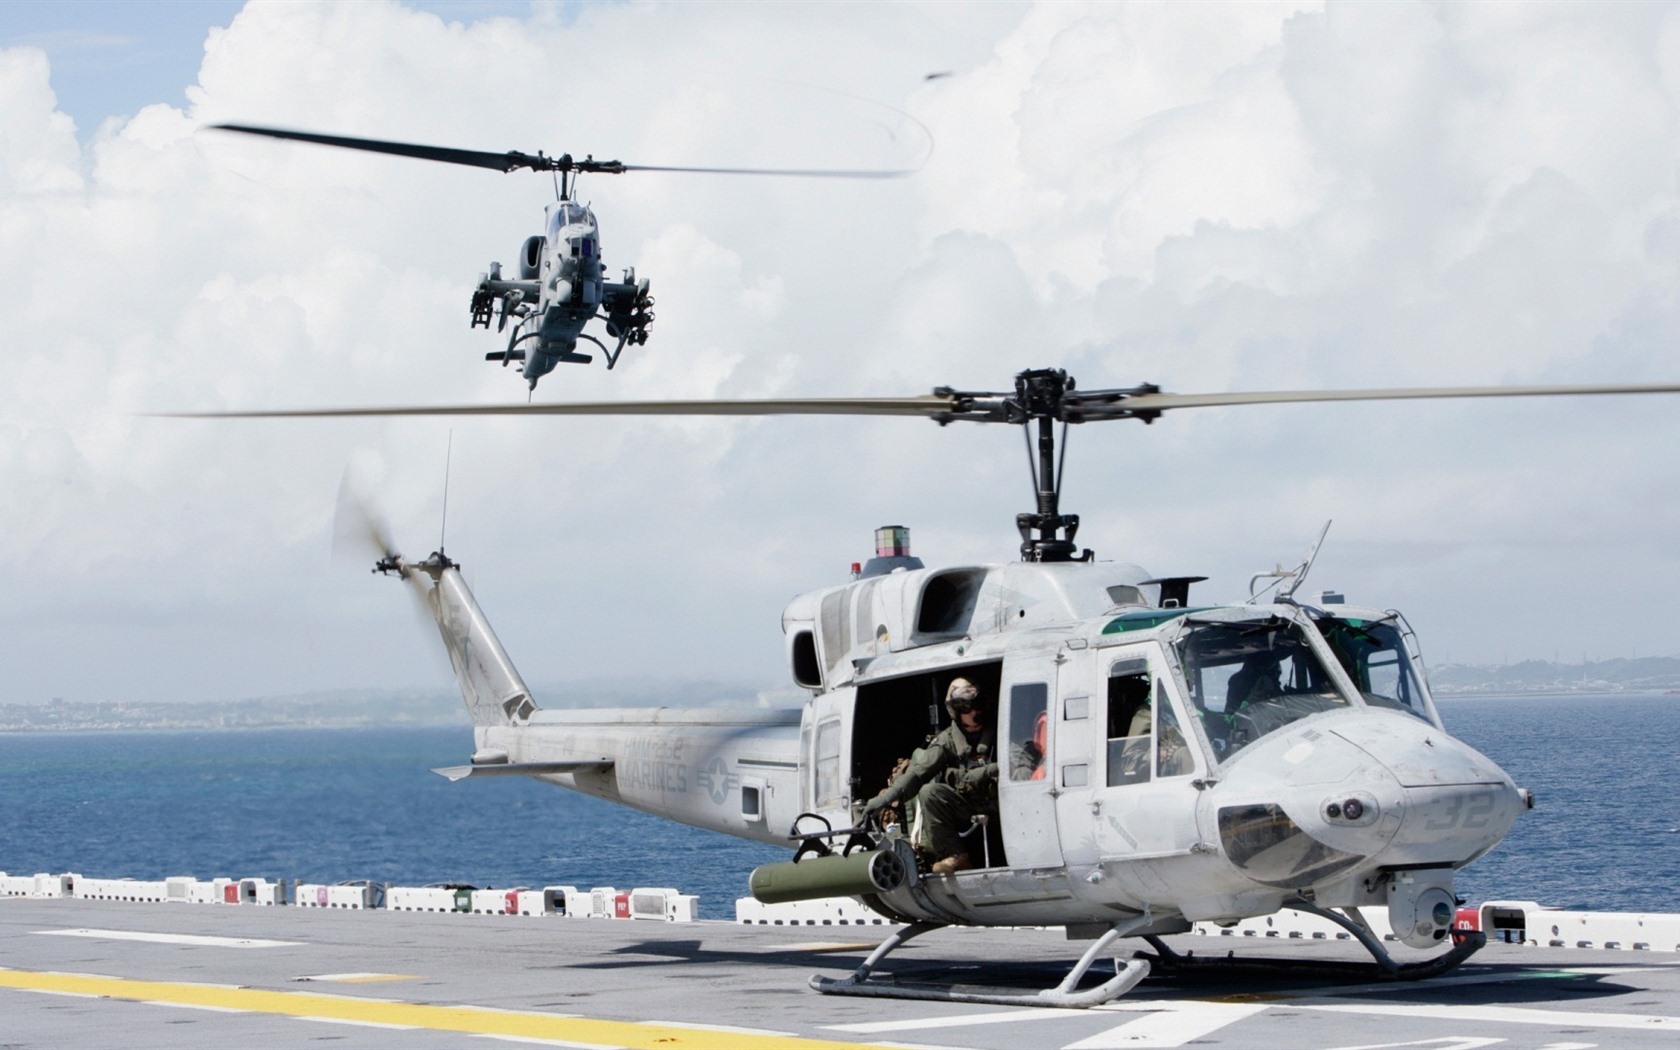 Military helicopters HD wallpapers #16 - 1680x1050